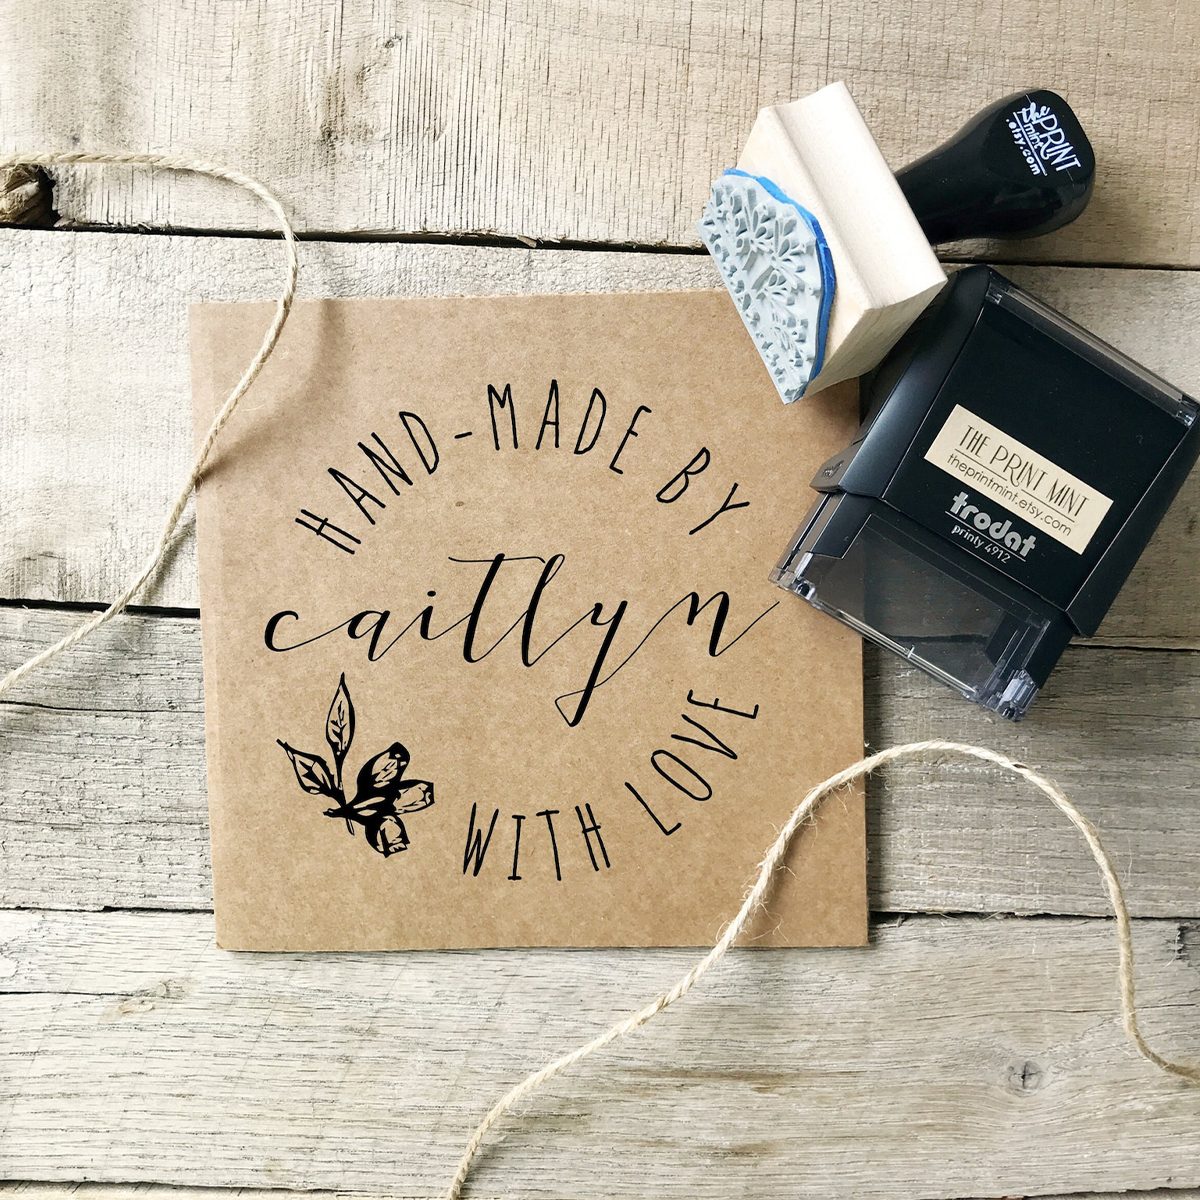 How to Make Your Own Rubber Stamps - Well Crafted Studio